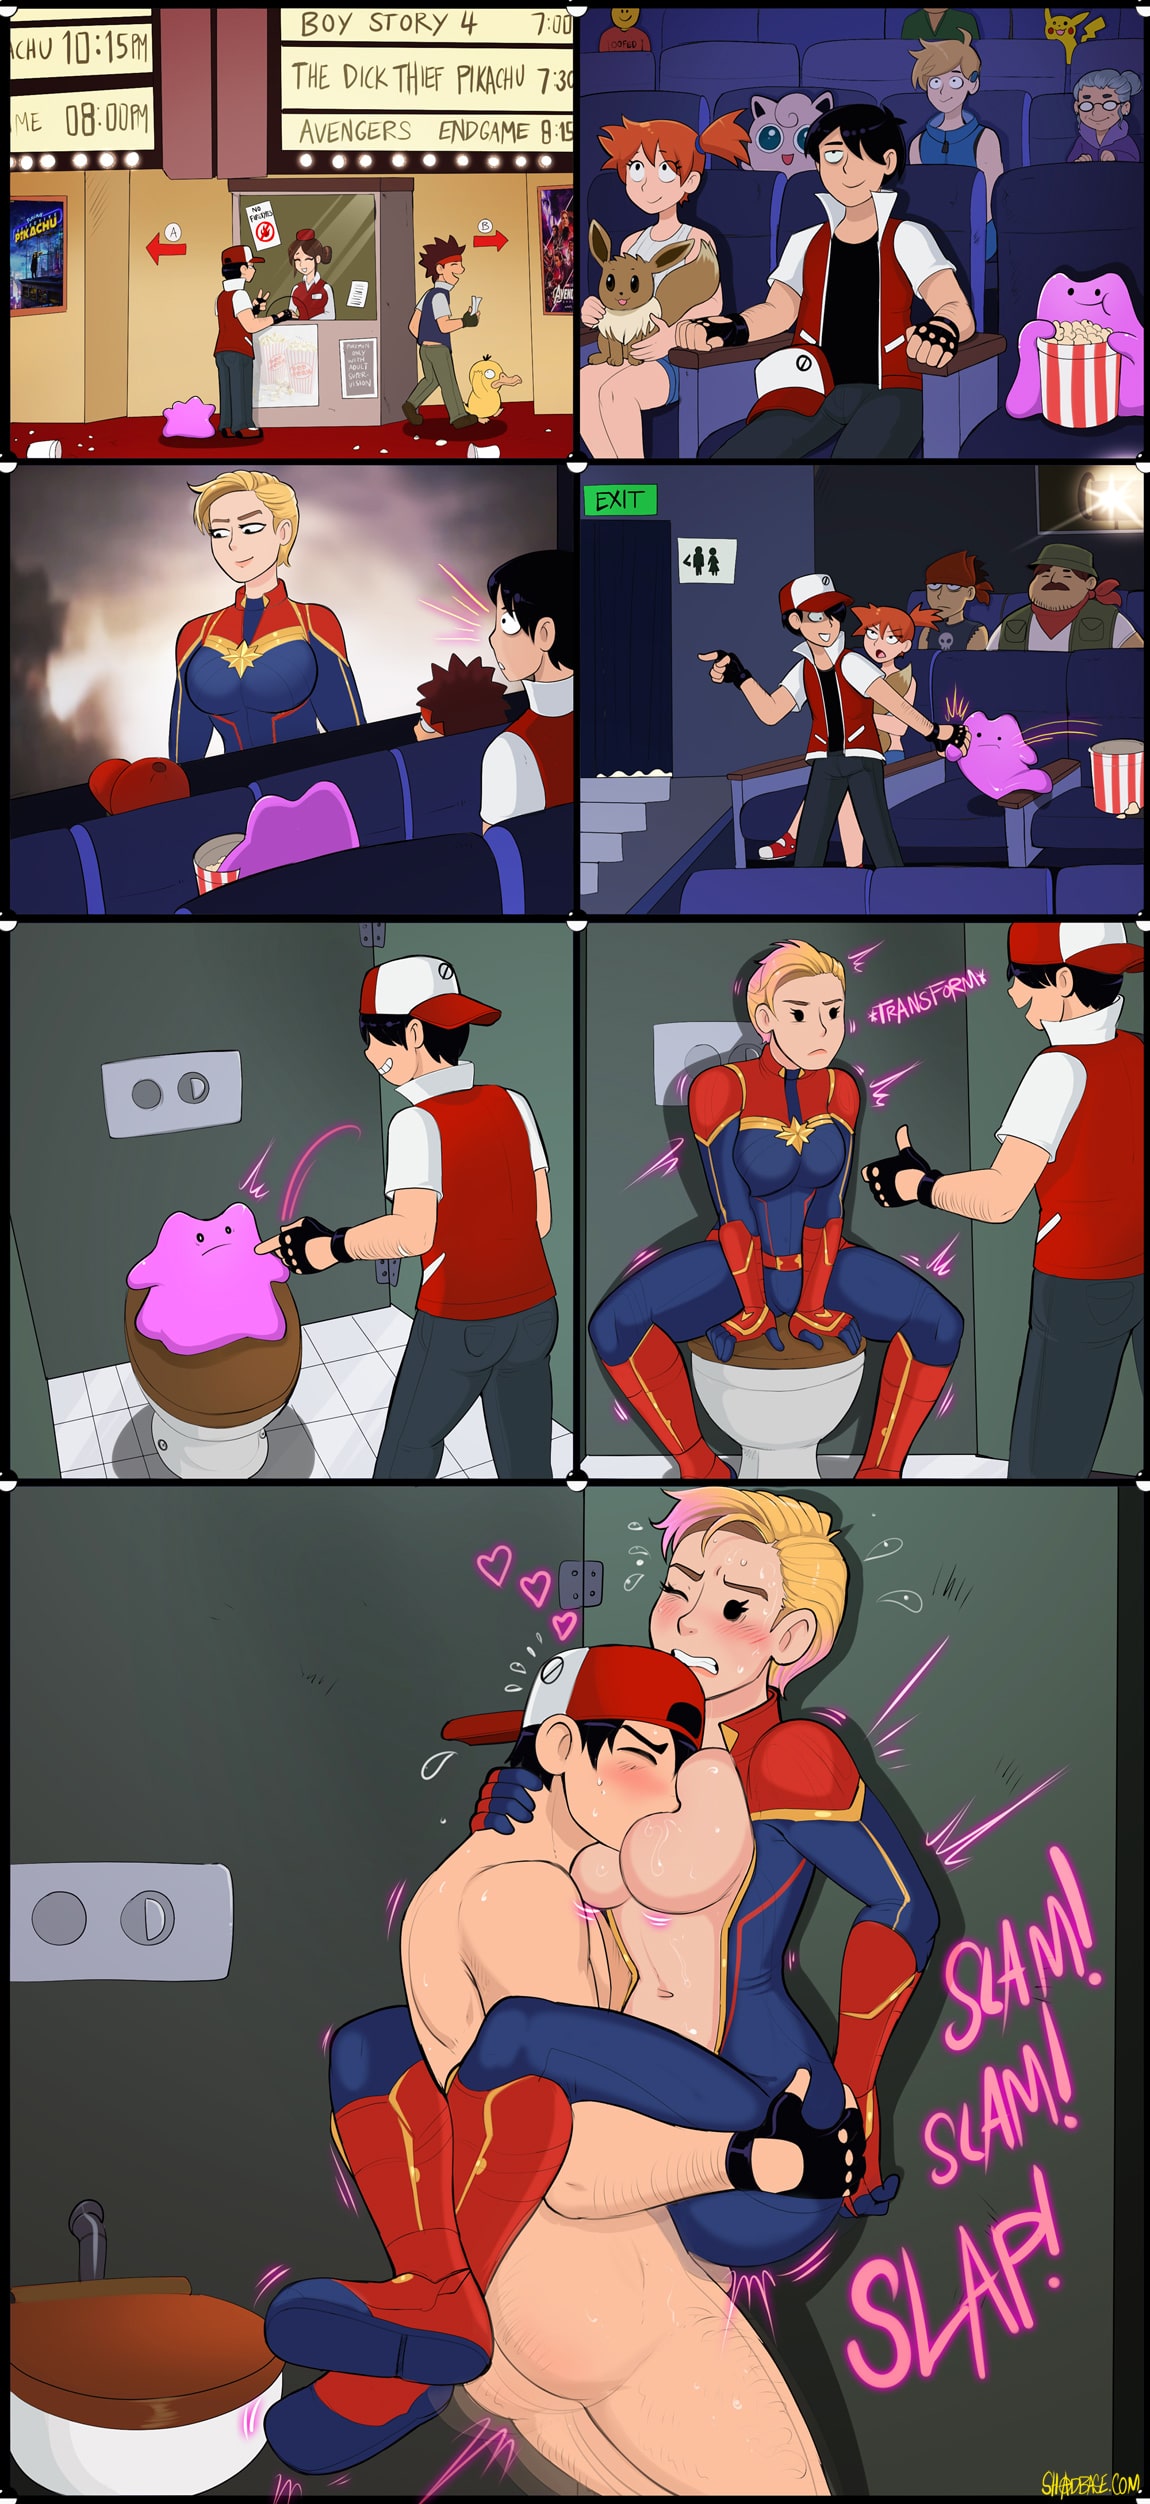 Ditto as Captain Marvel Endgame by Shadman